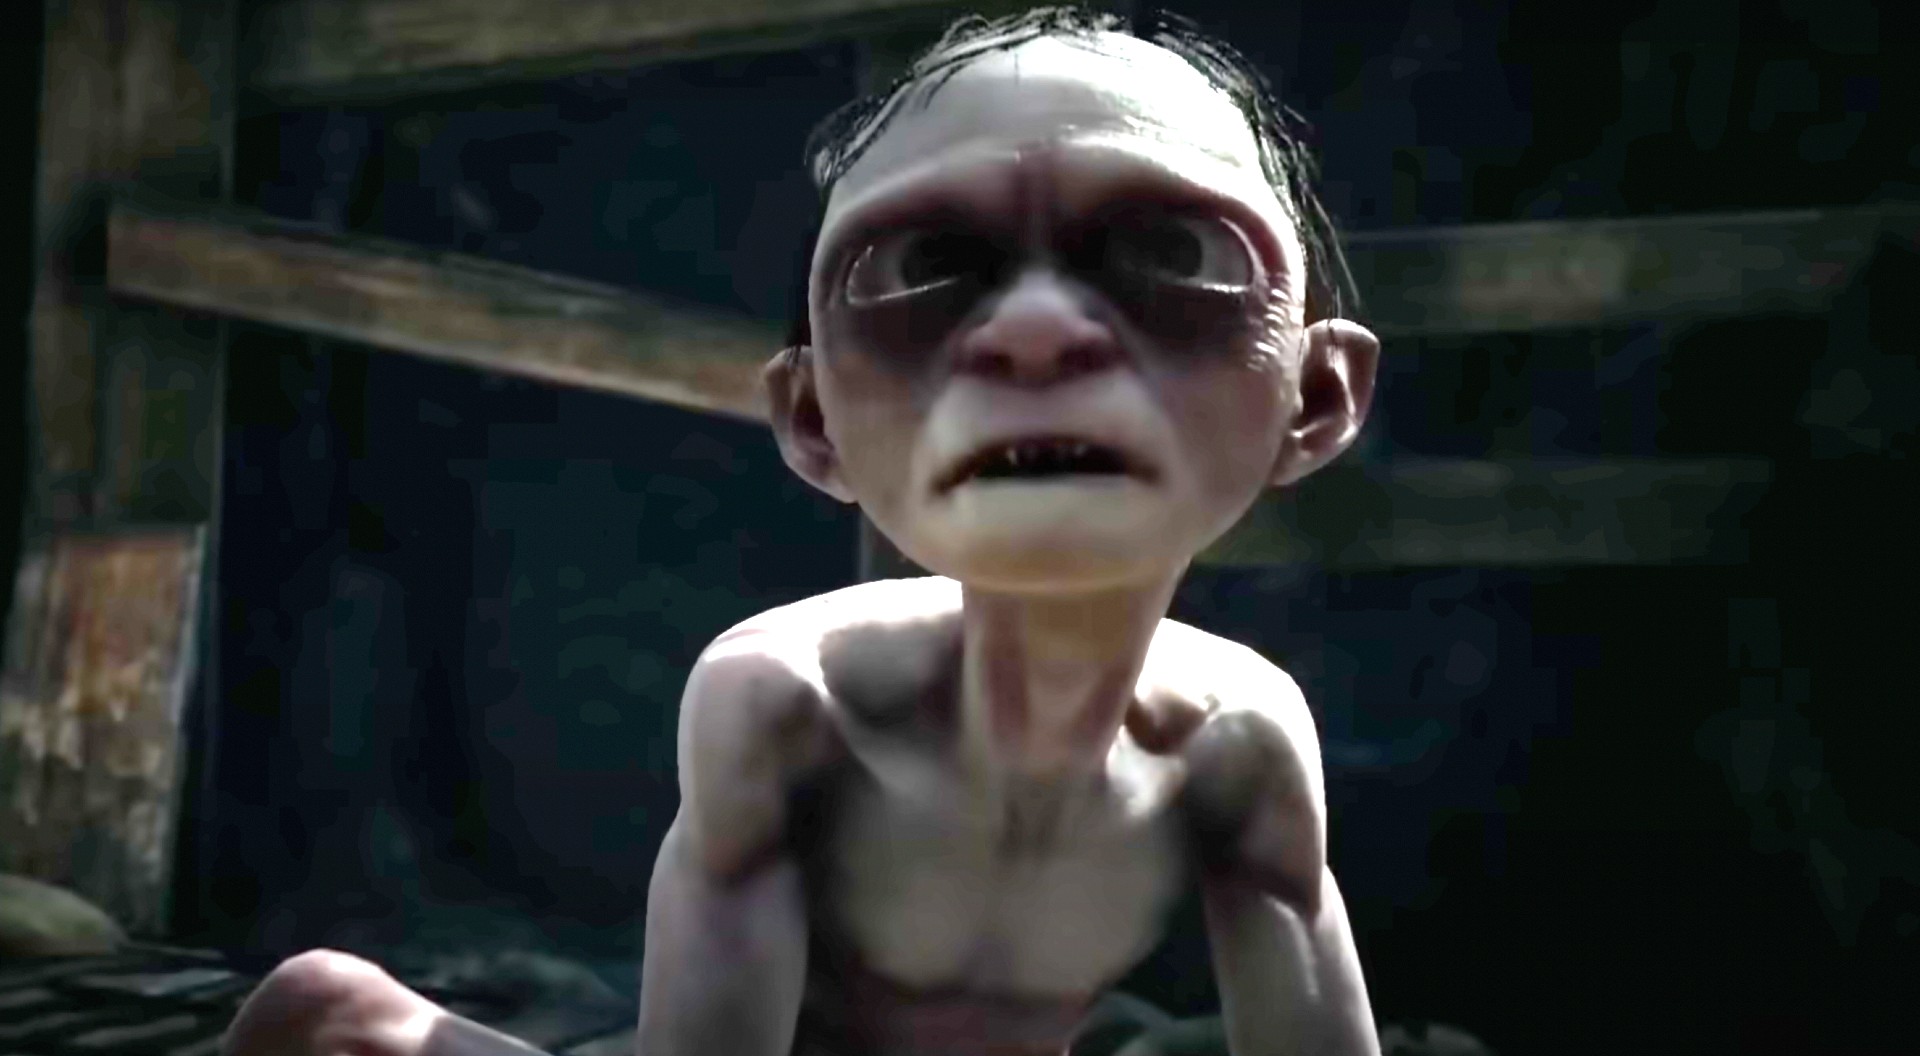 Stealth action game Lord Of The Rings: Gollum won't look like the movies